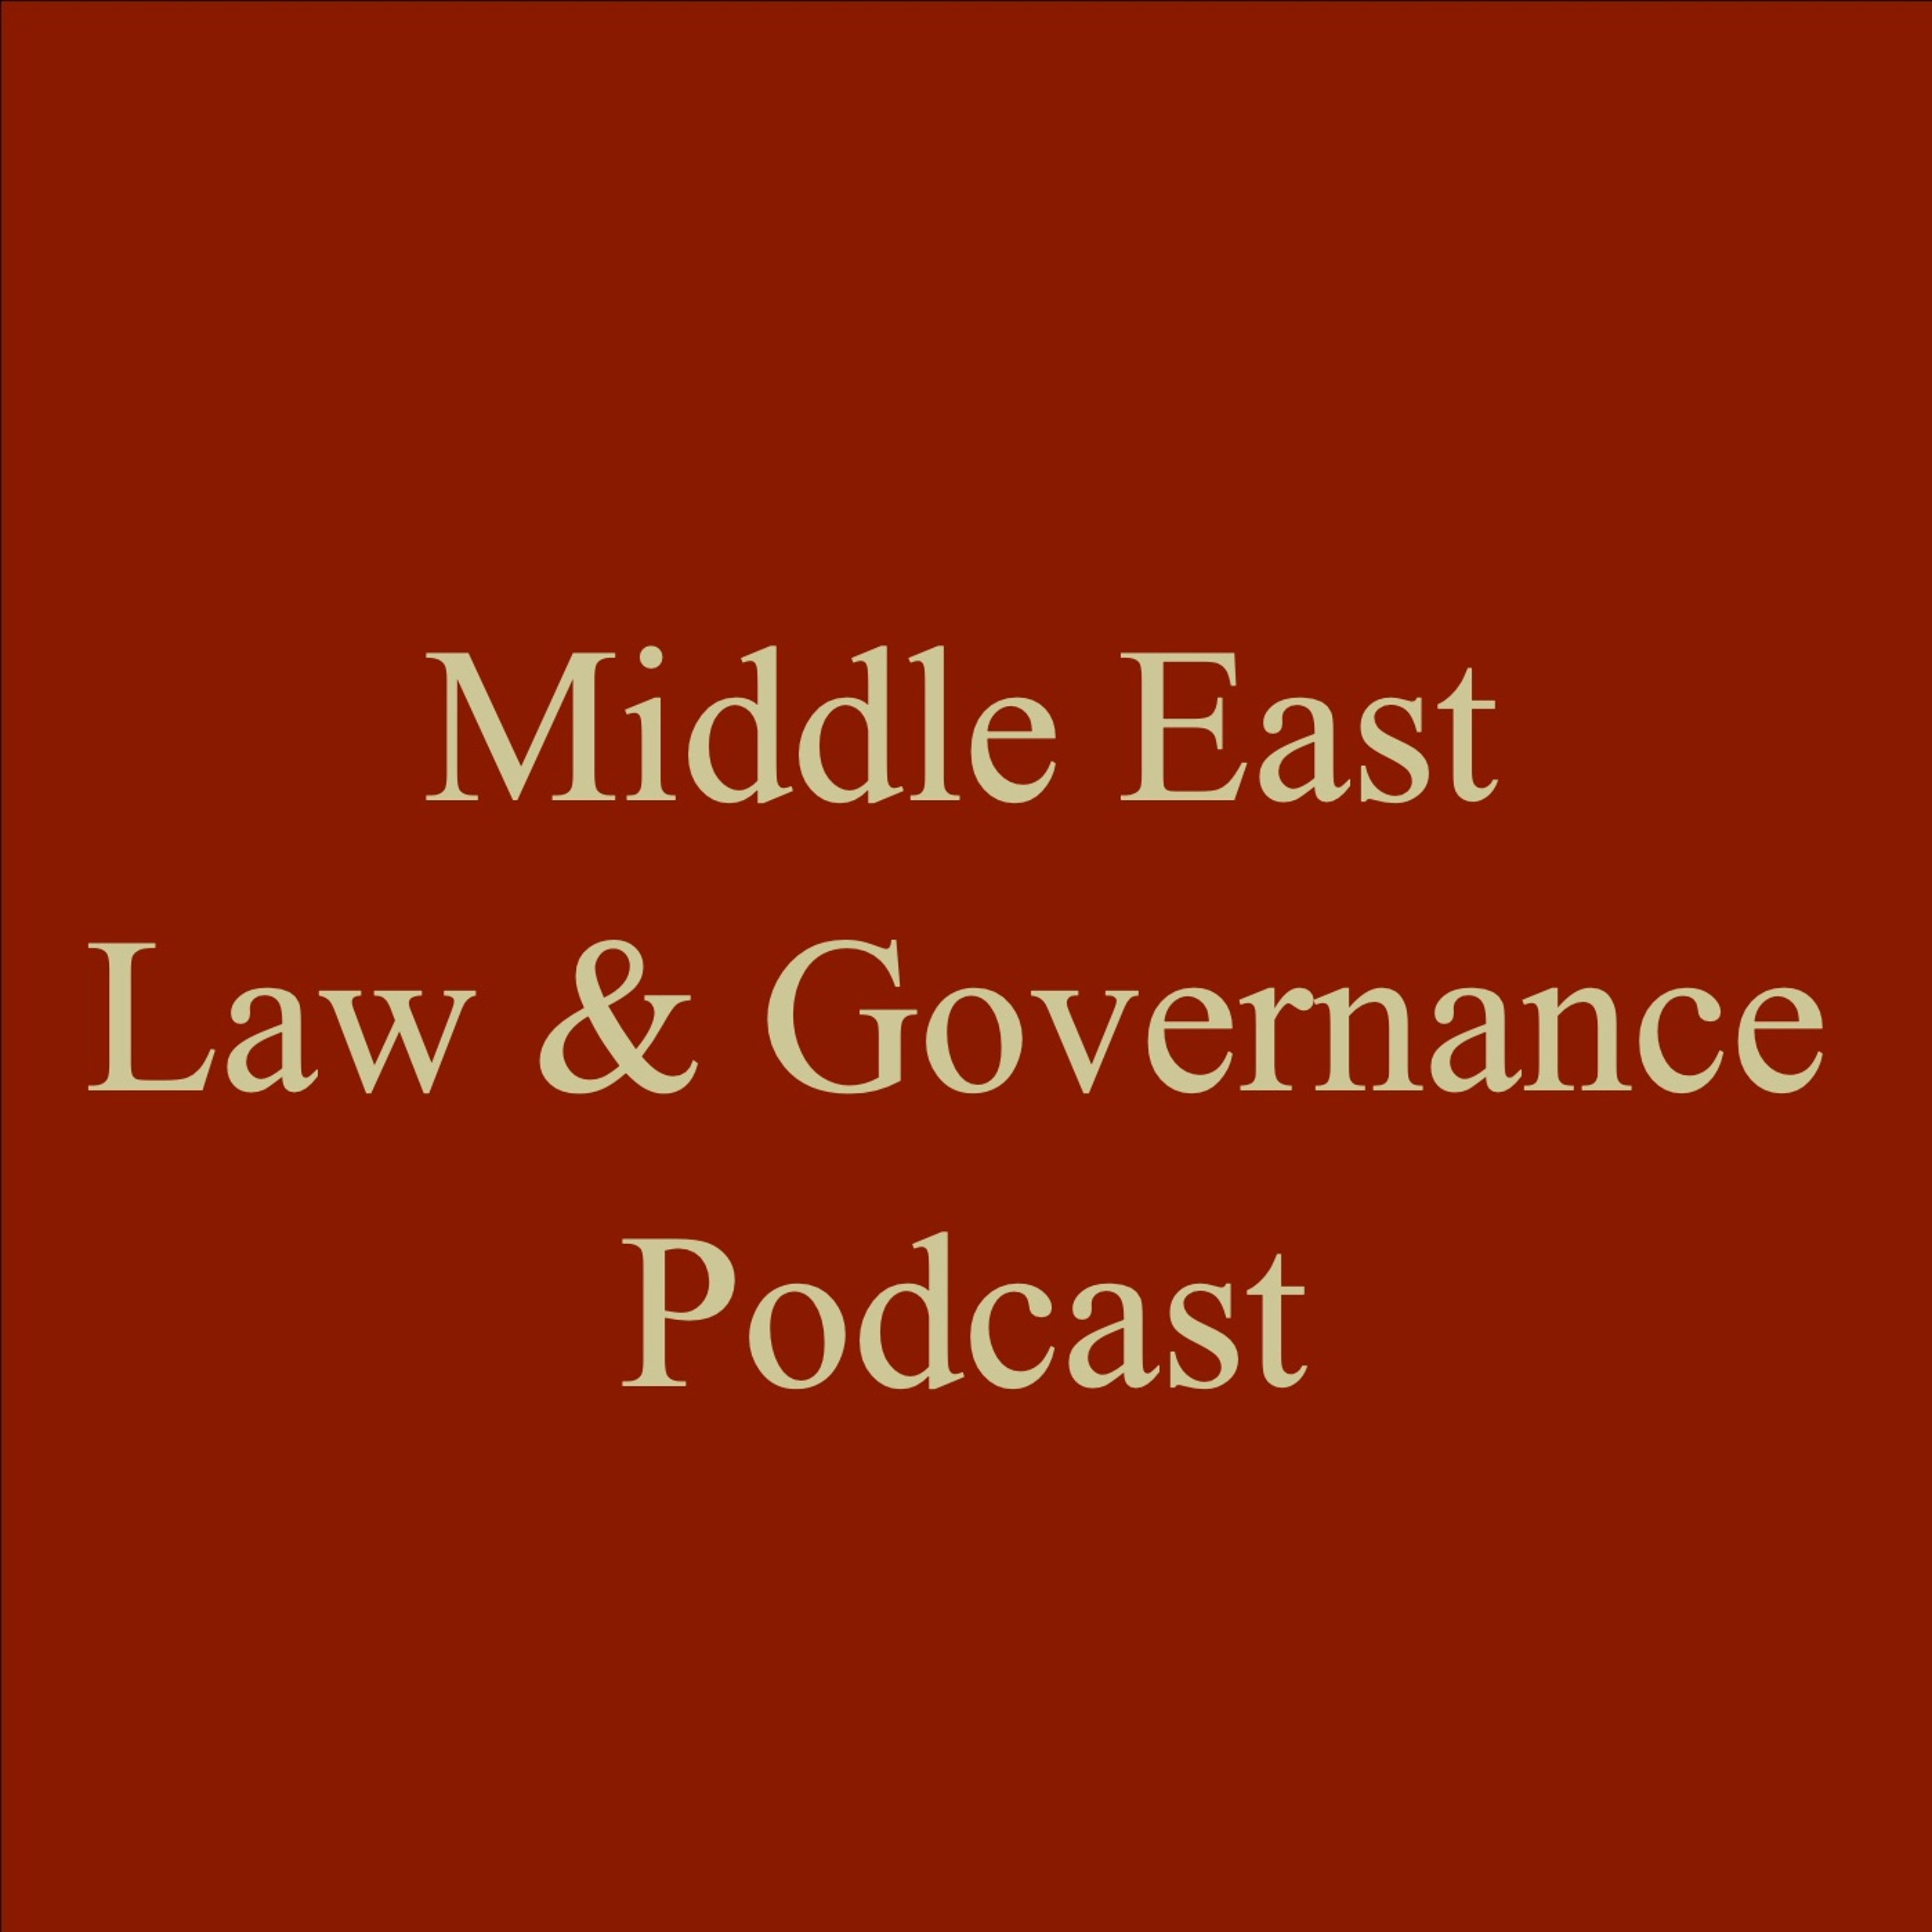 Episode 2 - Studying Islam and Muslims with Dr Anver Emon